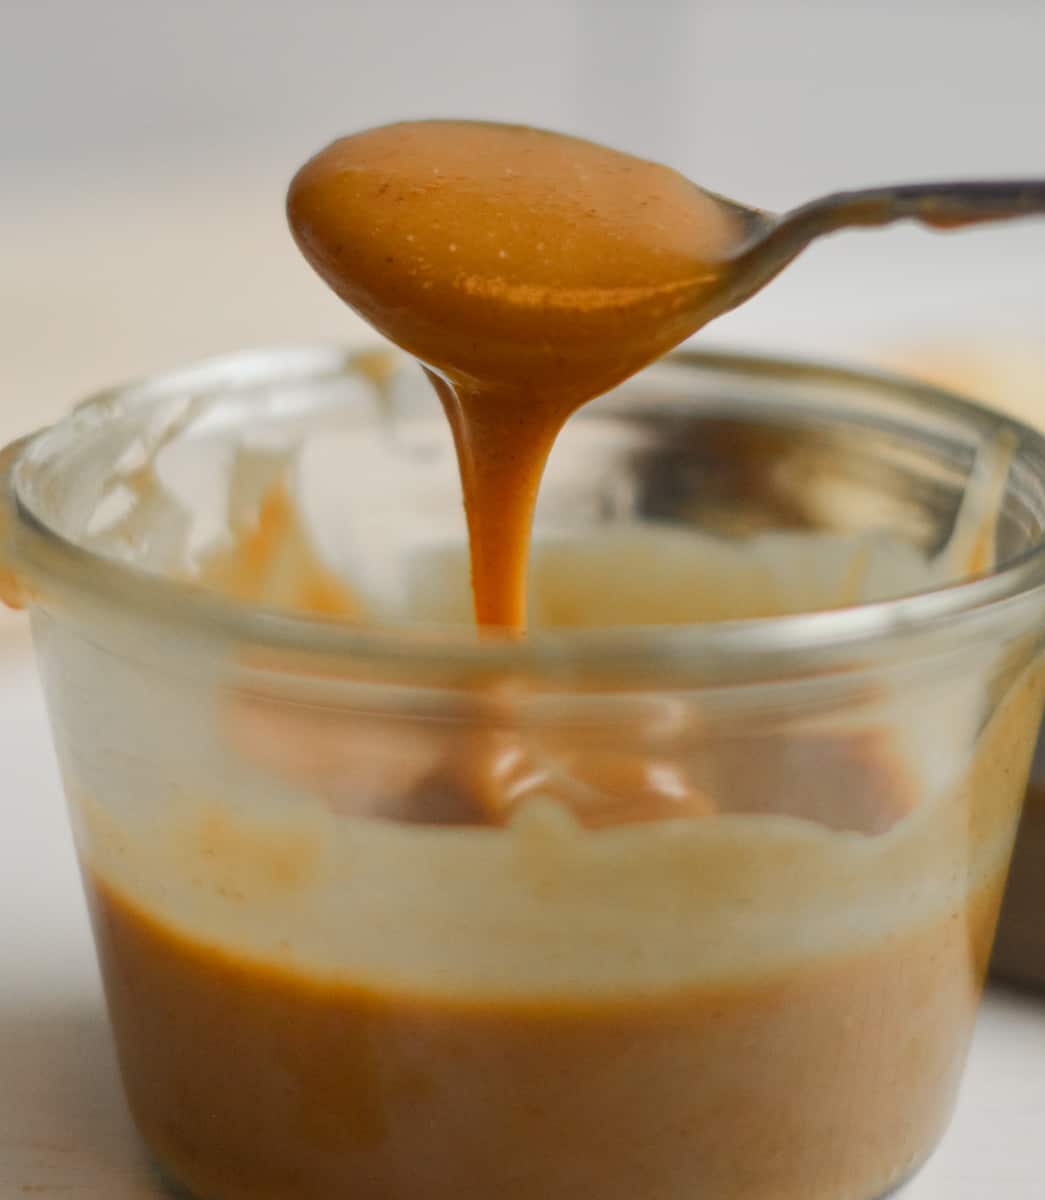 Taking a spoonful of peanut butter caramel from a jar.